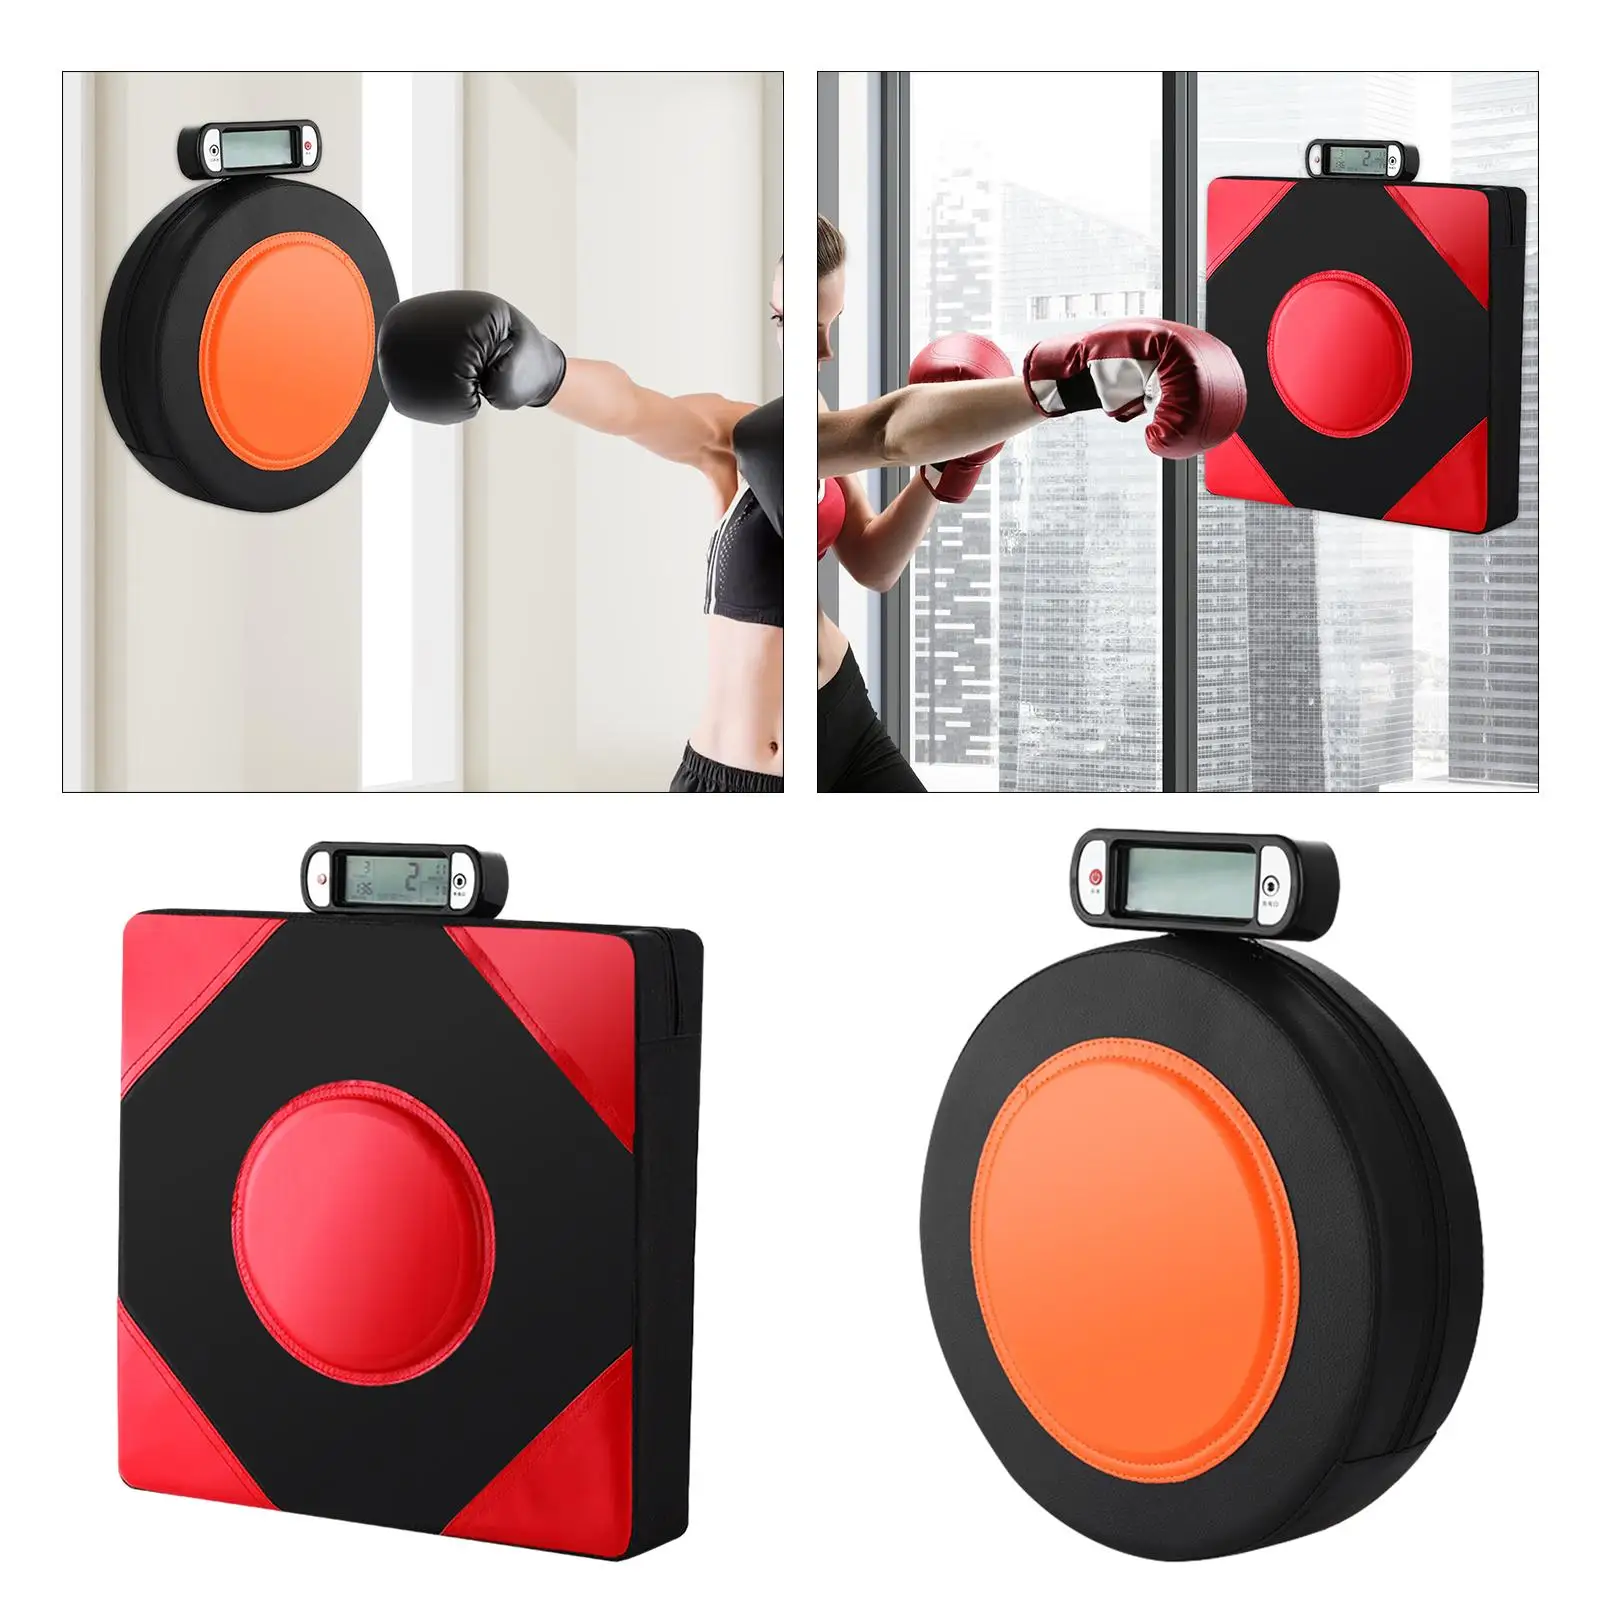 Boxing Strength Test Pads Digital Display Home Coaches Adjustable Height Improves Perception Boxing Machine Boxing Machine